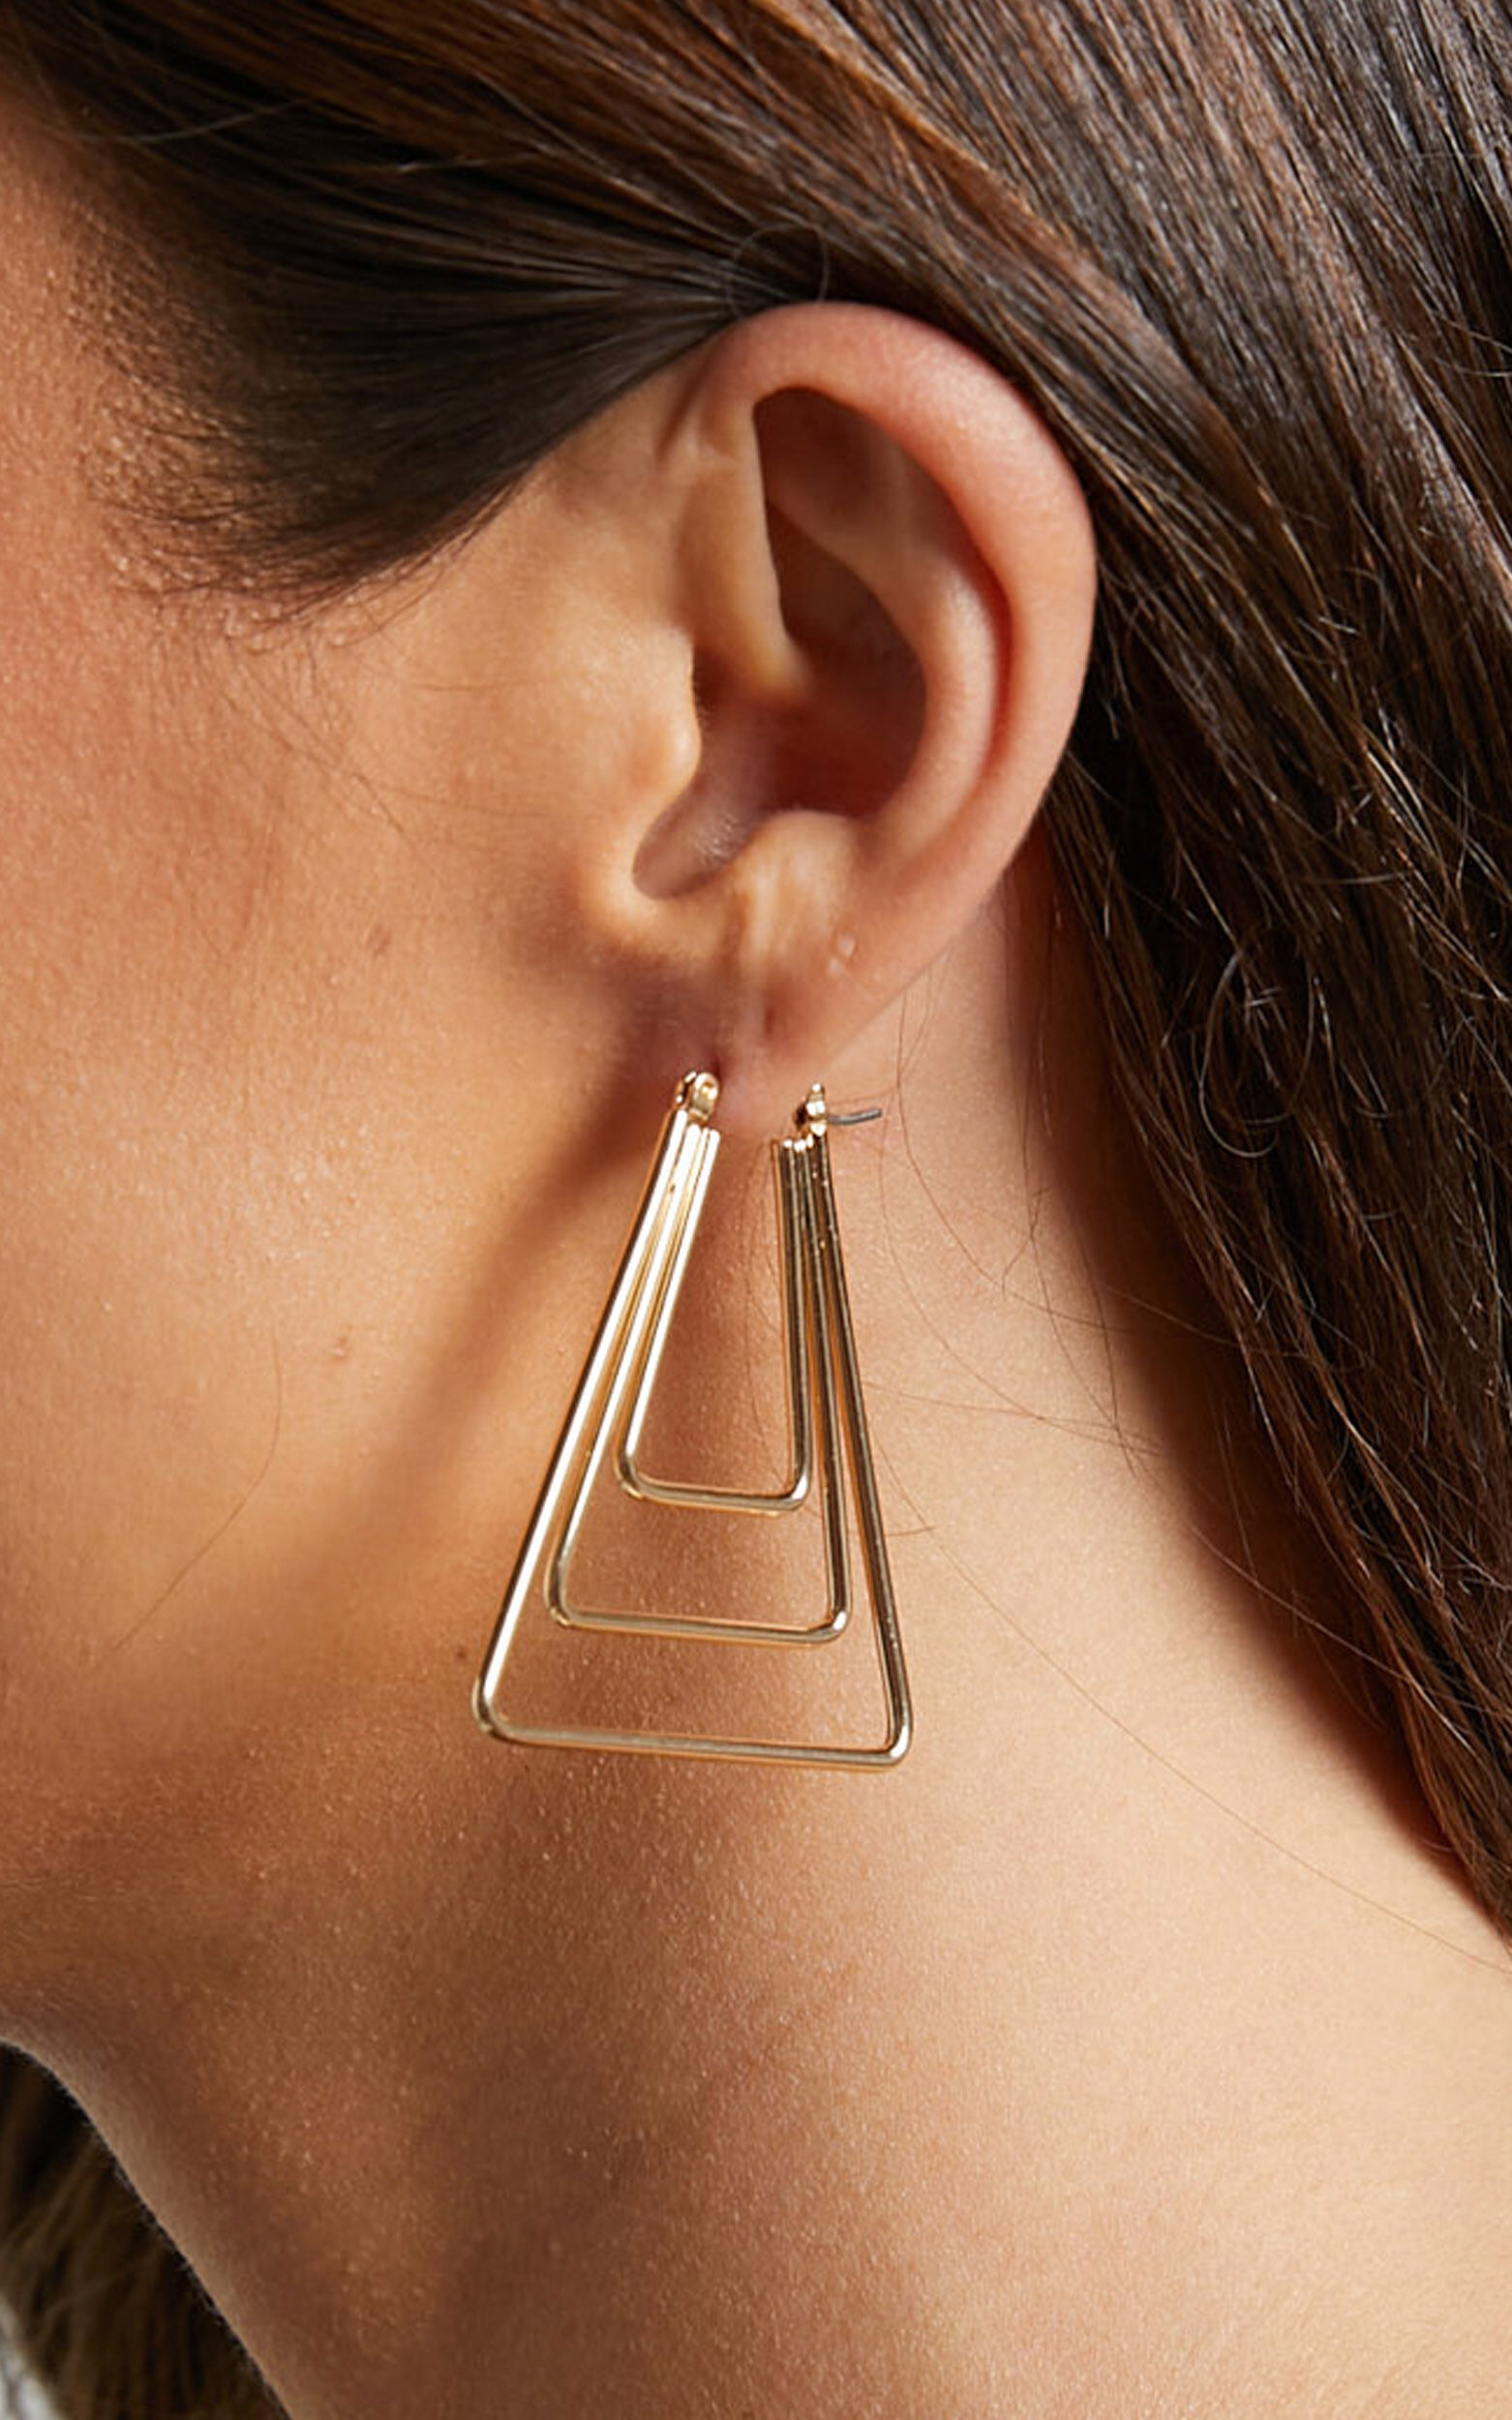 Myjela Earrings - Layered Triangle Hoop Earrings in Gold - NoSize, GLD1, super-hi-res image number null